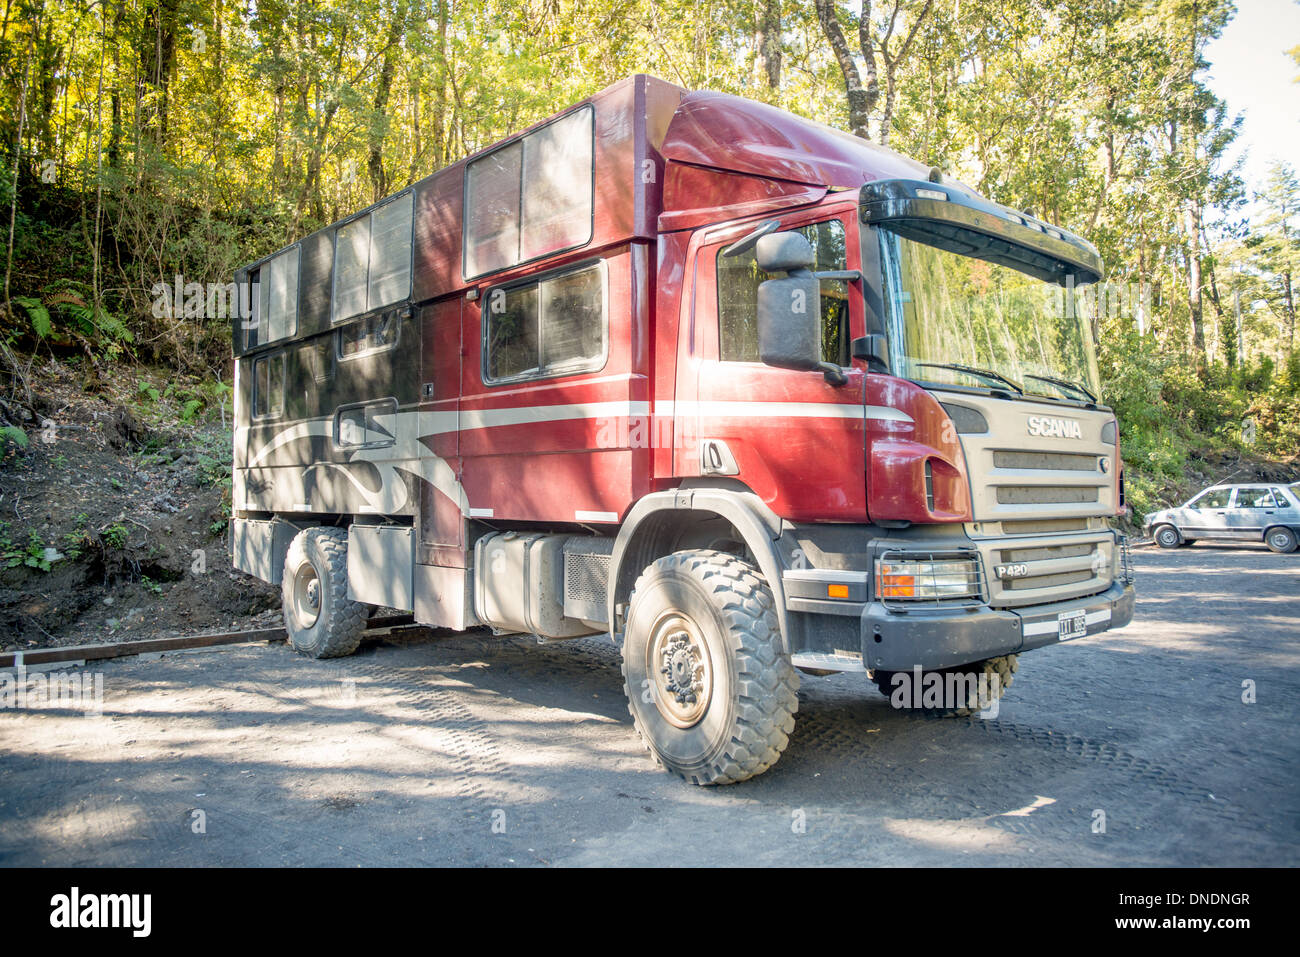 Off road rally truck RV in Chile Stock Photo